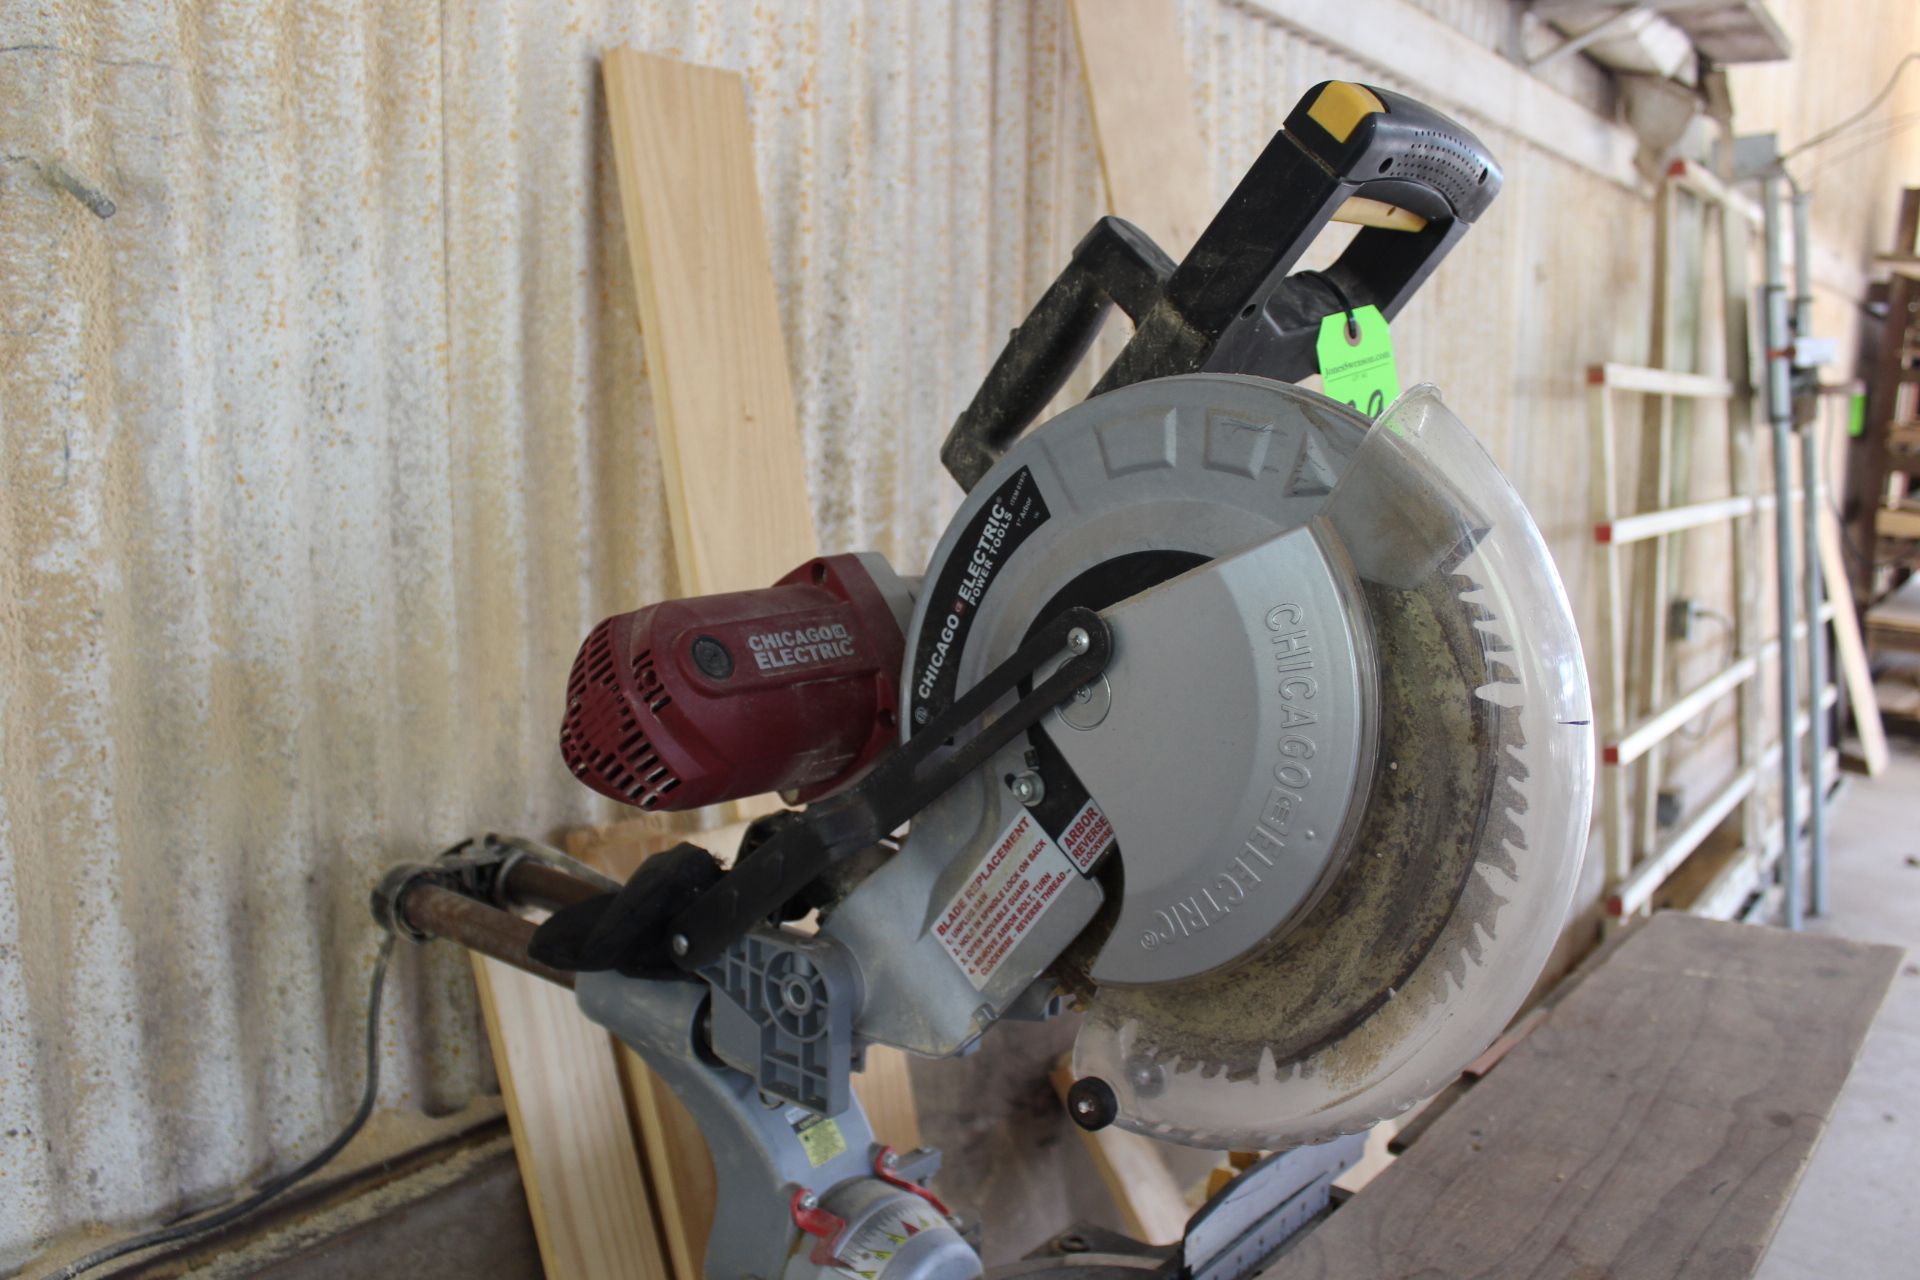 Chicago Electric 12" Double-Bevel Sliding Compound Miter Saw with Laser Guide, with Stand - Image 3 of 4